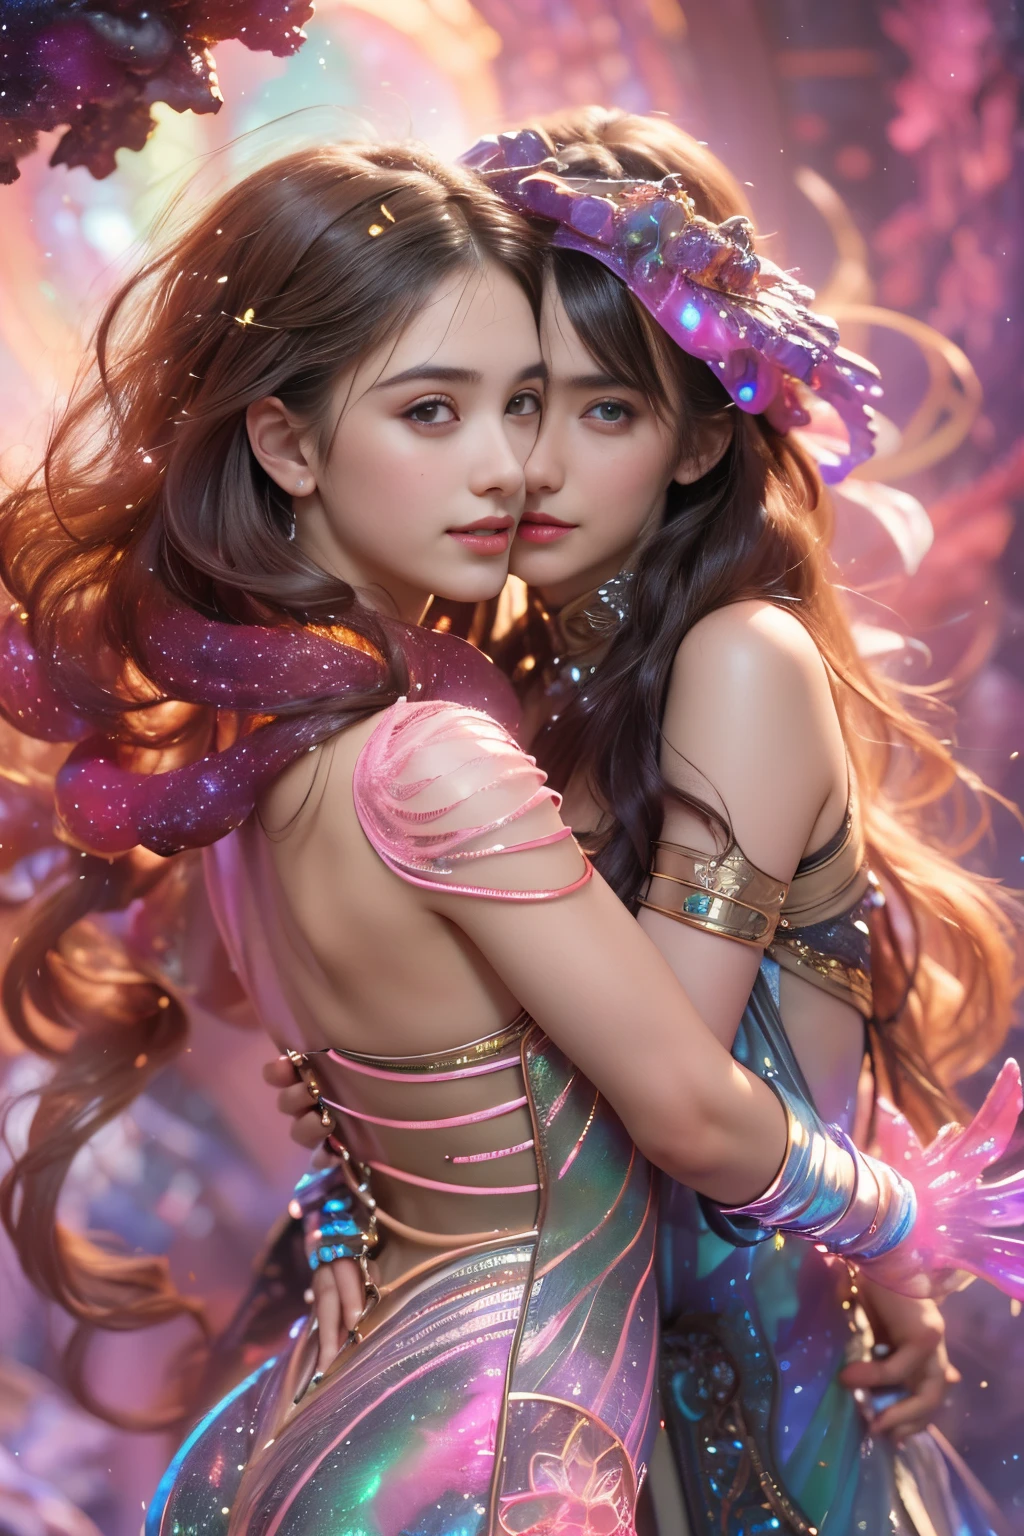 (Two beautiful teenage italian girls:1.6), Close friends, (They are hugging each other:1.2), Kiss her cheek or chest,(Detailed iridescent bodysuit with beautiful fractal or marble design:1.5), Incredible and spectacular scenes, ((High quality)), ((Detailed)), ((Fantasy)), Blue Plasma Brain, Green Plasma Body, Showing her armpits, beutiful breast,  obscenity, (Lewd smile:1.2), coarse, Obscene, mean, (raunchy:1.2), (Immoral:1.2), Lachish, (small breasts with beautiful raised pink areolas,,,,,,,,,,,,,:1.5), (Camel toe), (Expression of ecstasy:1.2), Photorealistic, Official art, Unity 8K Wall , 8K Portrait, Best Quality, Very high resolution, (Incredibly beautiful nature background:1.6), (18 years old:1.5), (Sexy and glamorous:1.1), (A coquettish expression:1.6), (seductively smiling:1.6),  (erotic posing:1.9), (Model Posing:1.8), Beautiful seductive face, Portrait, (Thick eyebrows:1.4), (Big scarlet eyes:1.6), Beautiful eyes with fine symmetry, (Ultra detailed eyes:1.4),(Highly detailed face and eyes:1.7), (High-resolution red-eye:1.8), Intimate face, (ultra detailed skin texture:1.4), White skin, pale skin, Perfect Anatomy, Thin, (Beautiful toned body:1.5), Highly detailed hair,  (Moist skin:1.2), No makeup, (dark circles:1.1), Good anatomy, Focus Face, good-looking, (Emilia Clark:0.6) (Emma watson:0.3),(Jennifer Connelly:0.4), ( Face:1.5), Elegant face, Nice,  (A delicately crafted necklace is wrapped around her neck...............), (Bioluminescence with brilliant brilliance:1.4), (Luminous magic circle:1.5), Ruins of an ancient castle, Shining majestic cloud masses and sky, lightning bolt, Epic Realistic, (Greg Rutkowski:0.8), (teal and orange:0.4), (Art Station:1.5), Cinematic, (NSFW:1.2),  Hyper Detailed, Dramatic light, (Intricate details:1.1), Beautiful black hair,　(Wearing a gauntlet with a dense and very beautiful design decorated with jewels:1.1), , Galaxy, (nebulas:1.6), (Beautiful frame with no frills:1.2), The Dark Knight, Fully armored body focus